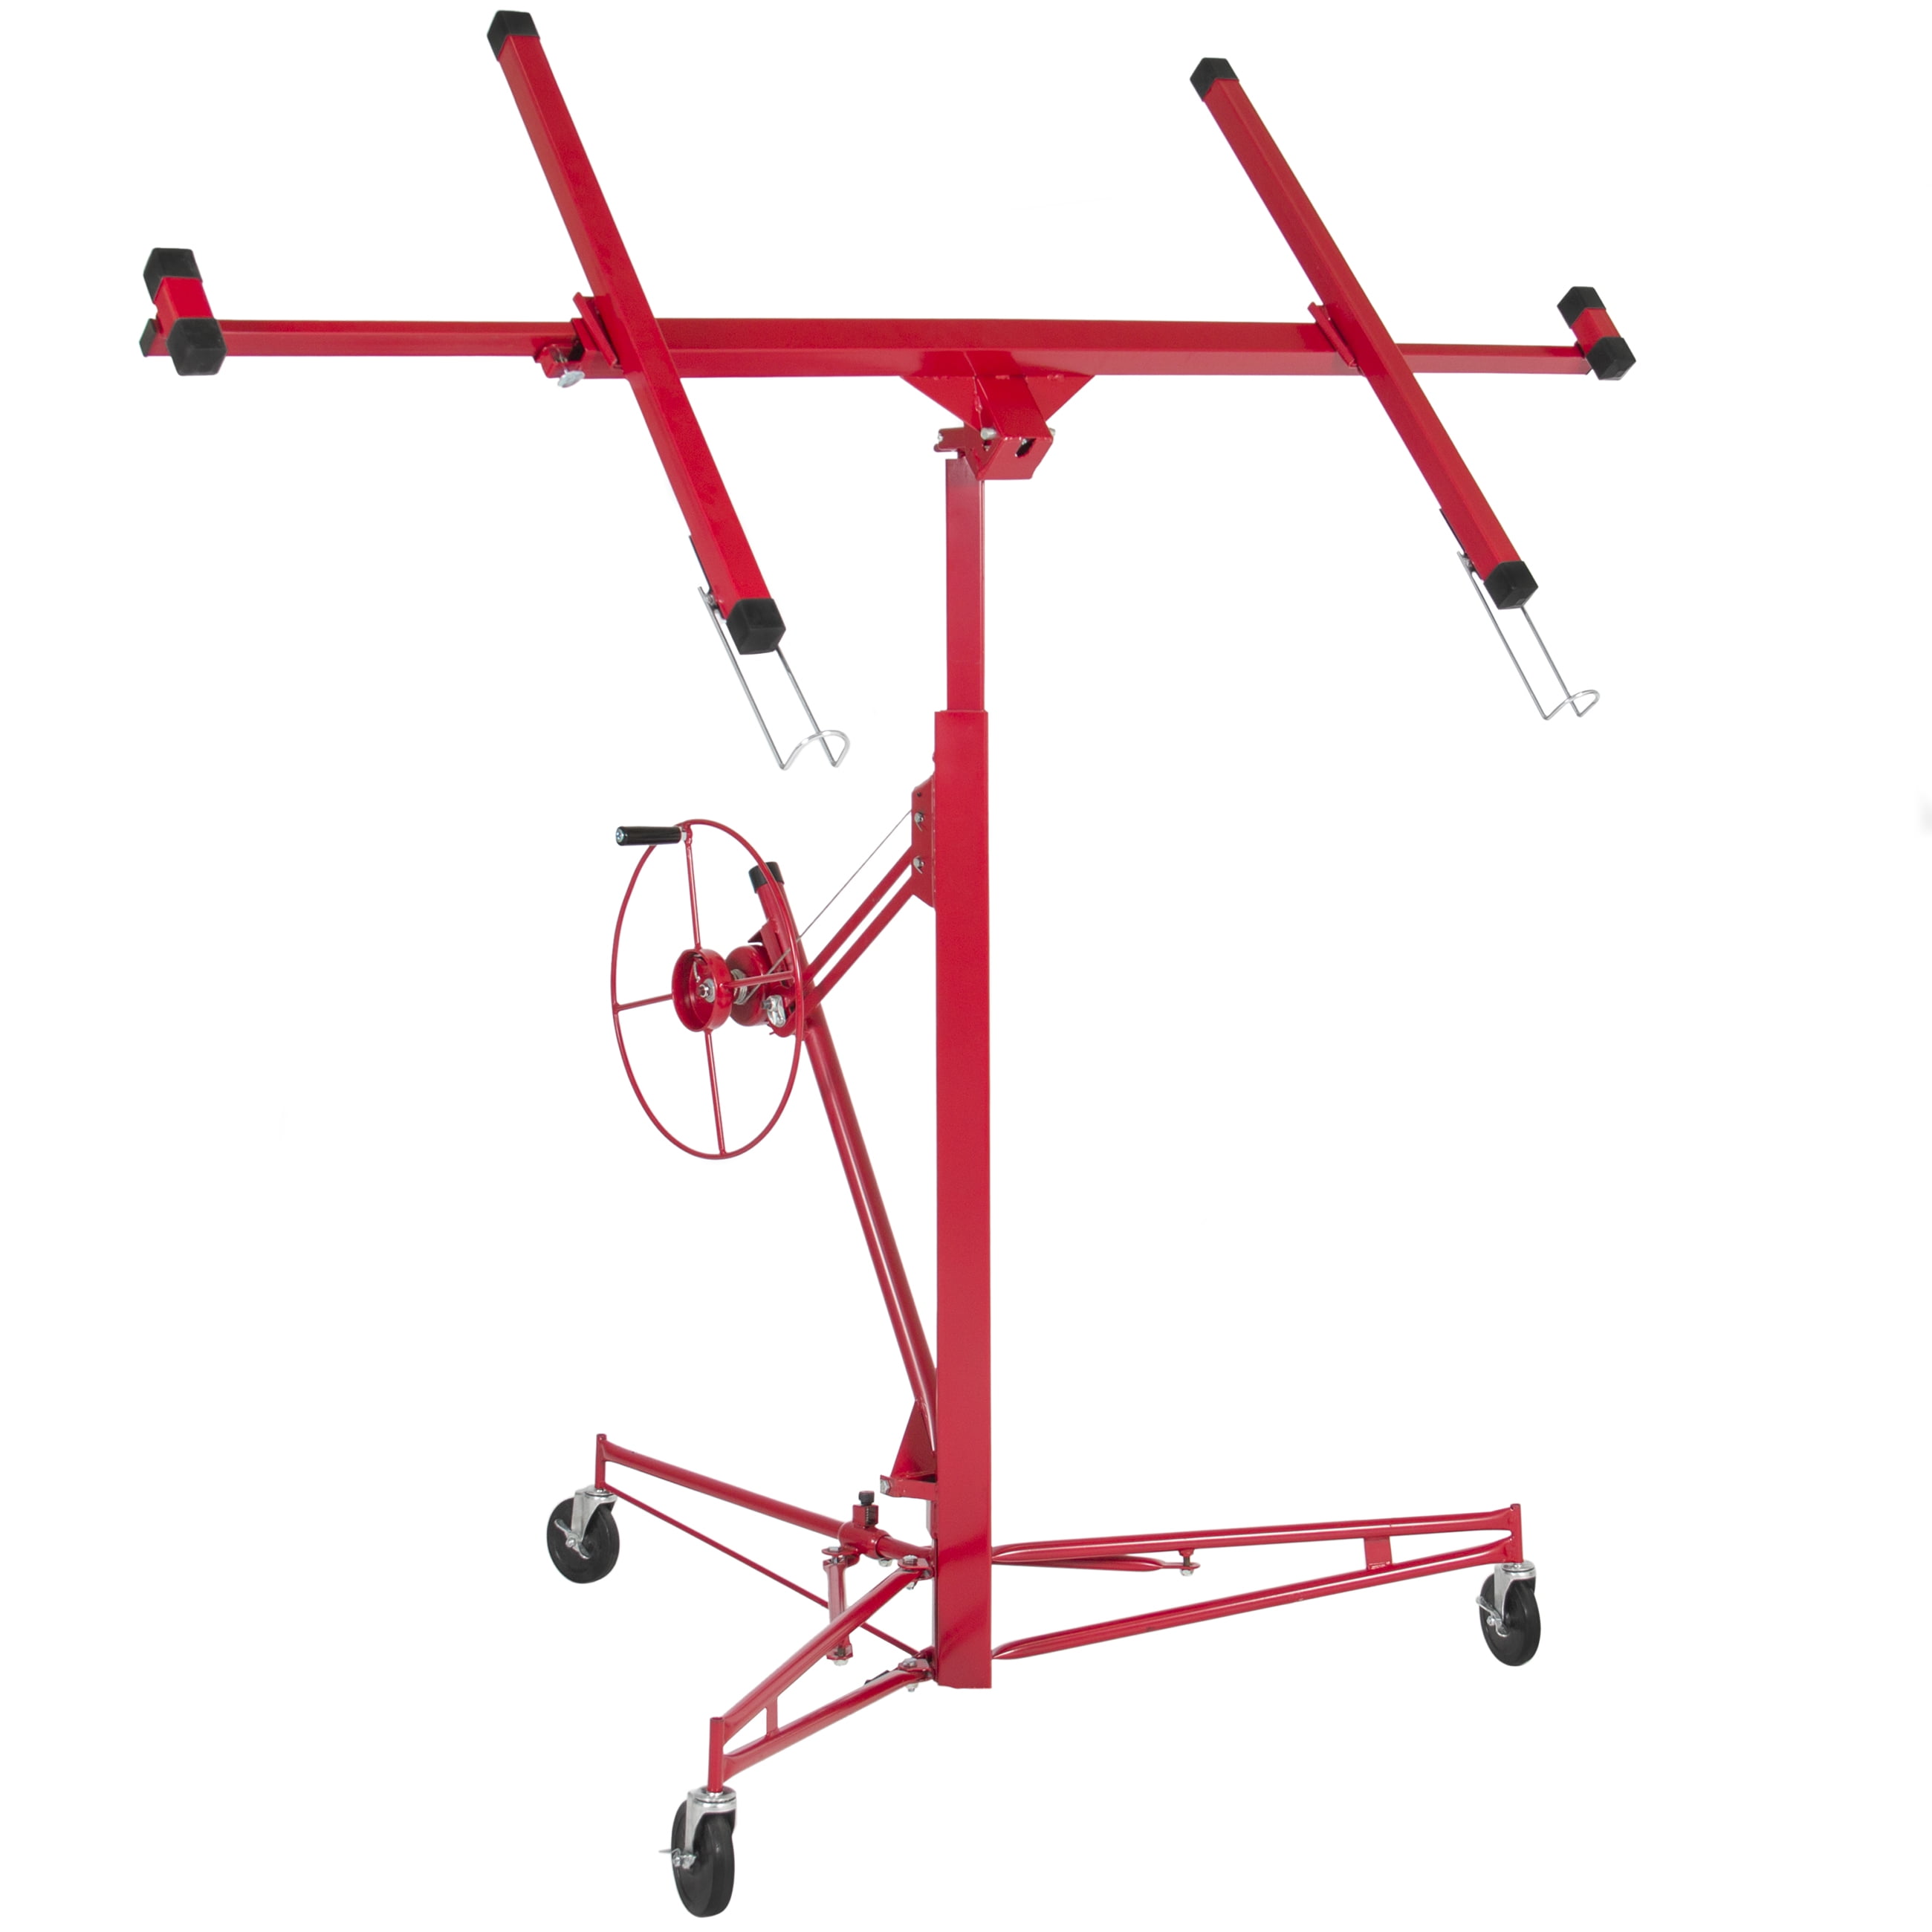 Best Choice Products 11ft Drywall Lift Panel Hoistjack Lifter